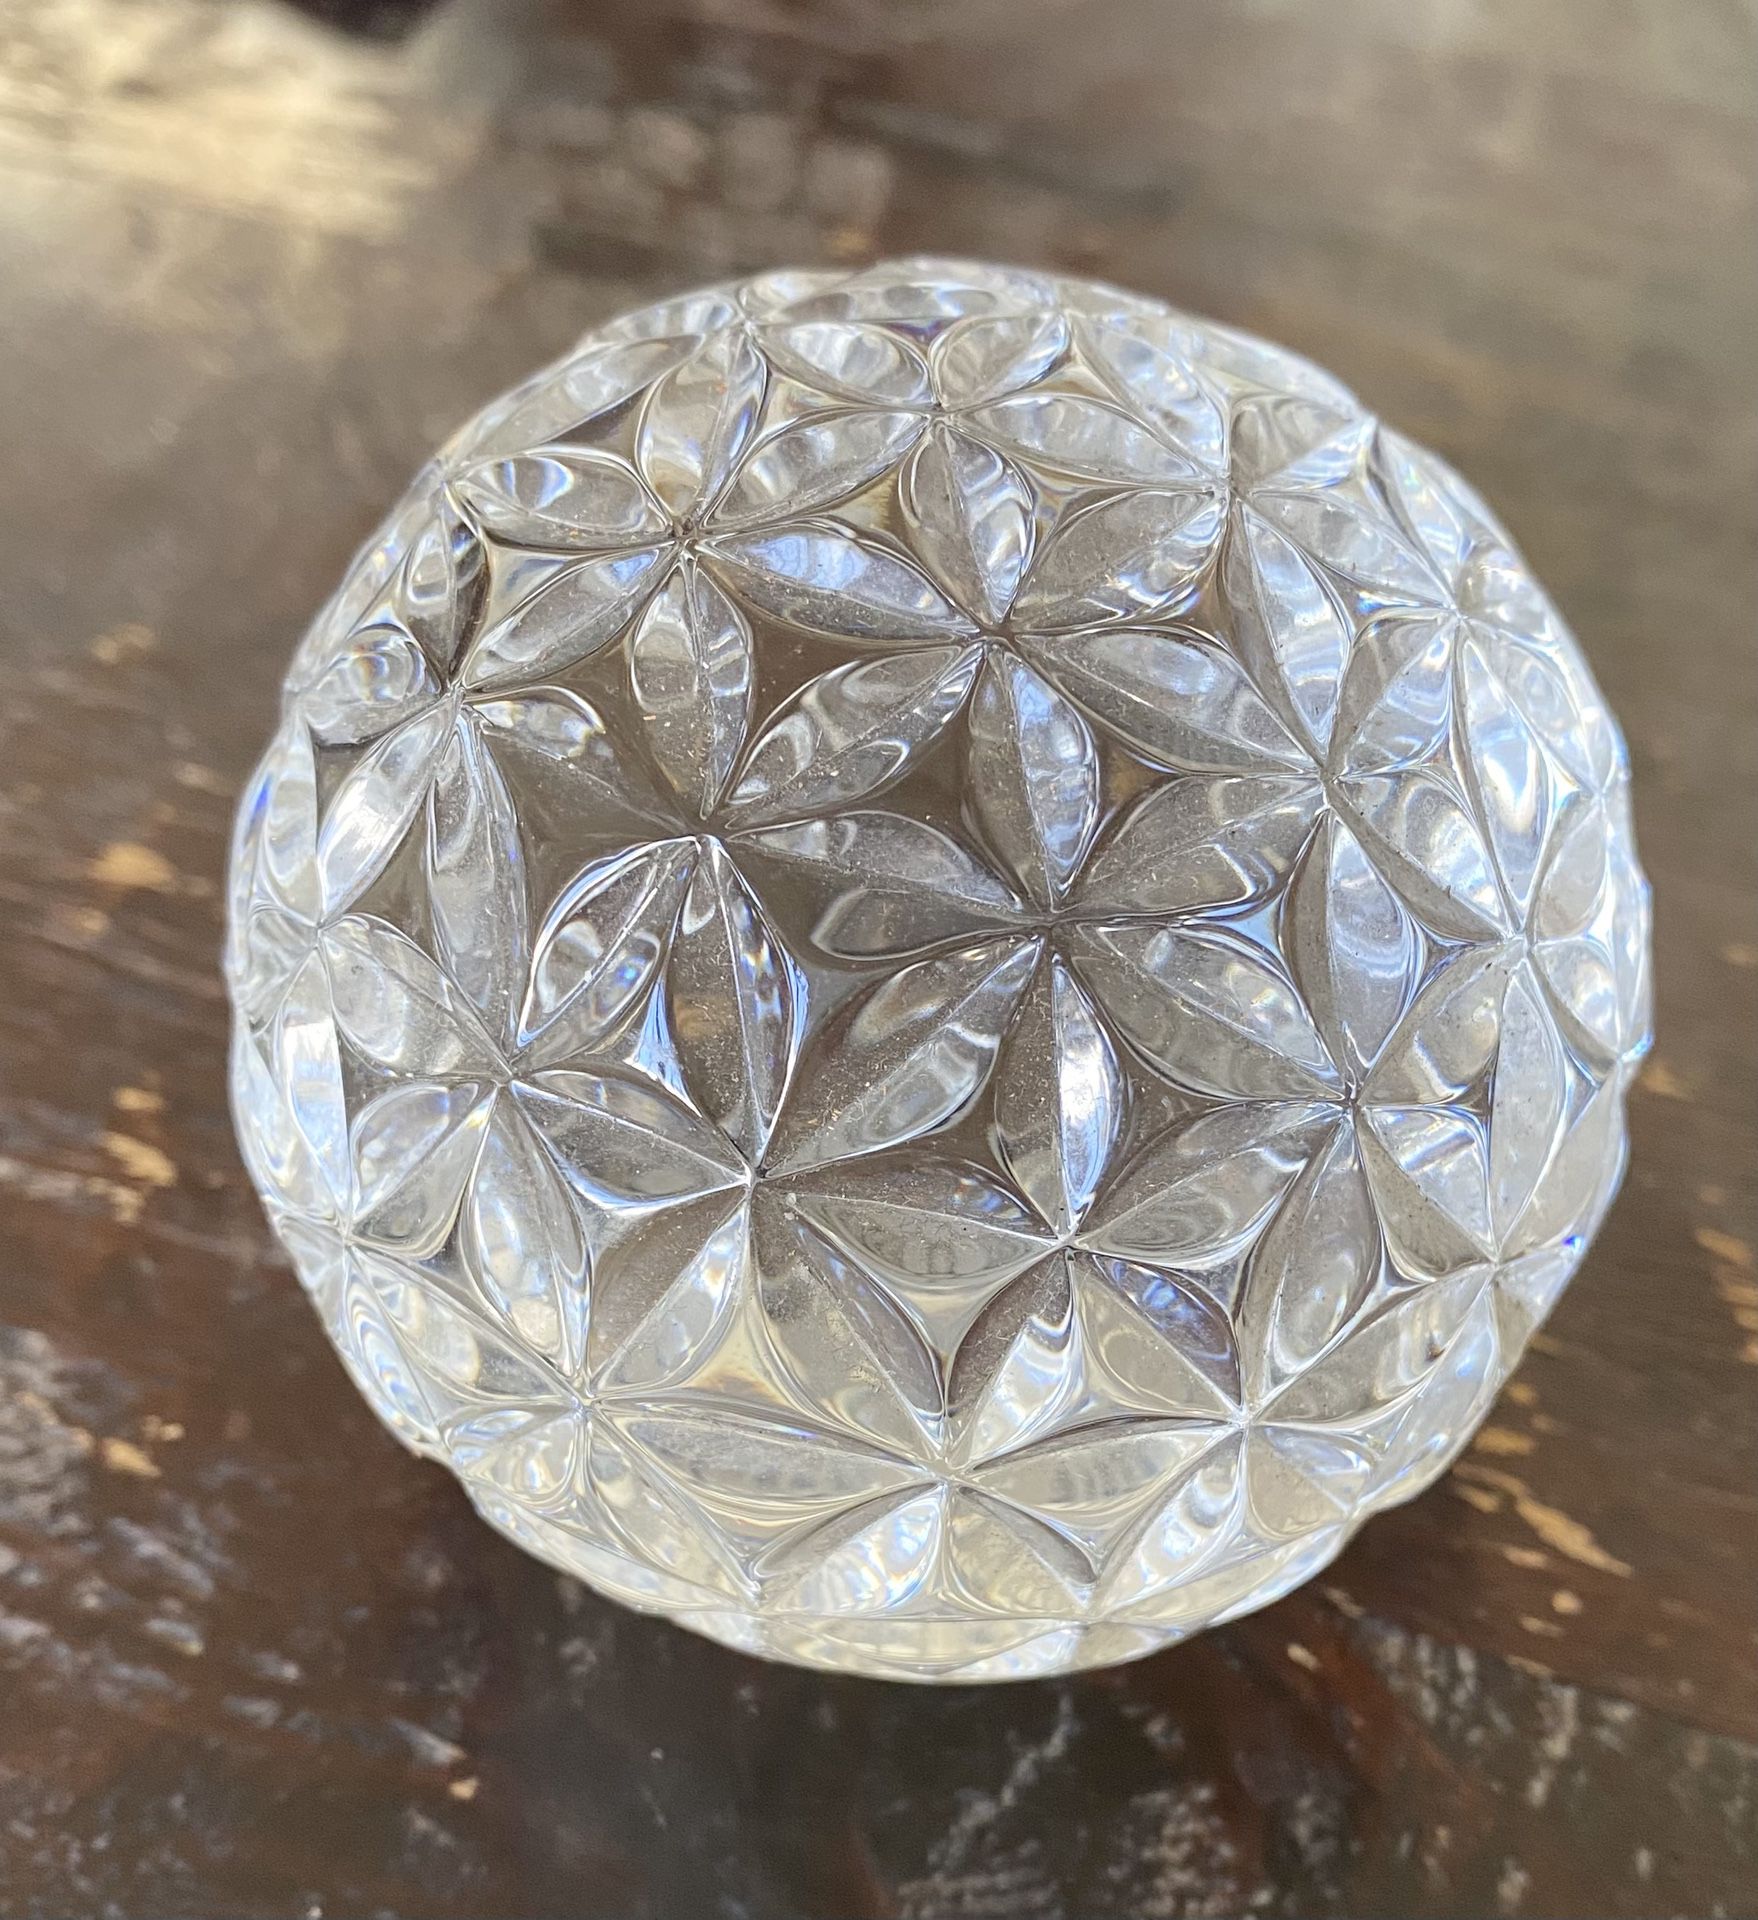 Waterford Crystal Star of Hope Times Square 2000 Solid Ball Paperweight 3" Diameter 